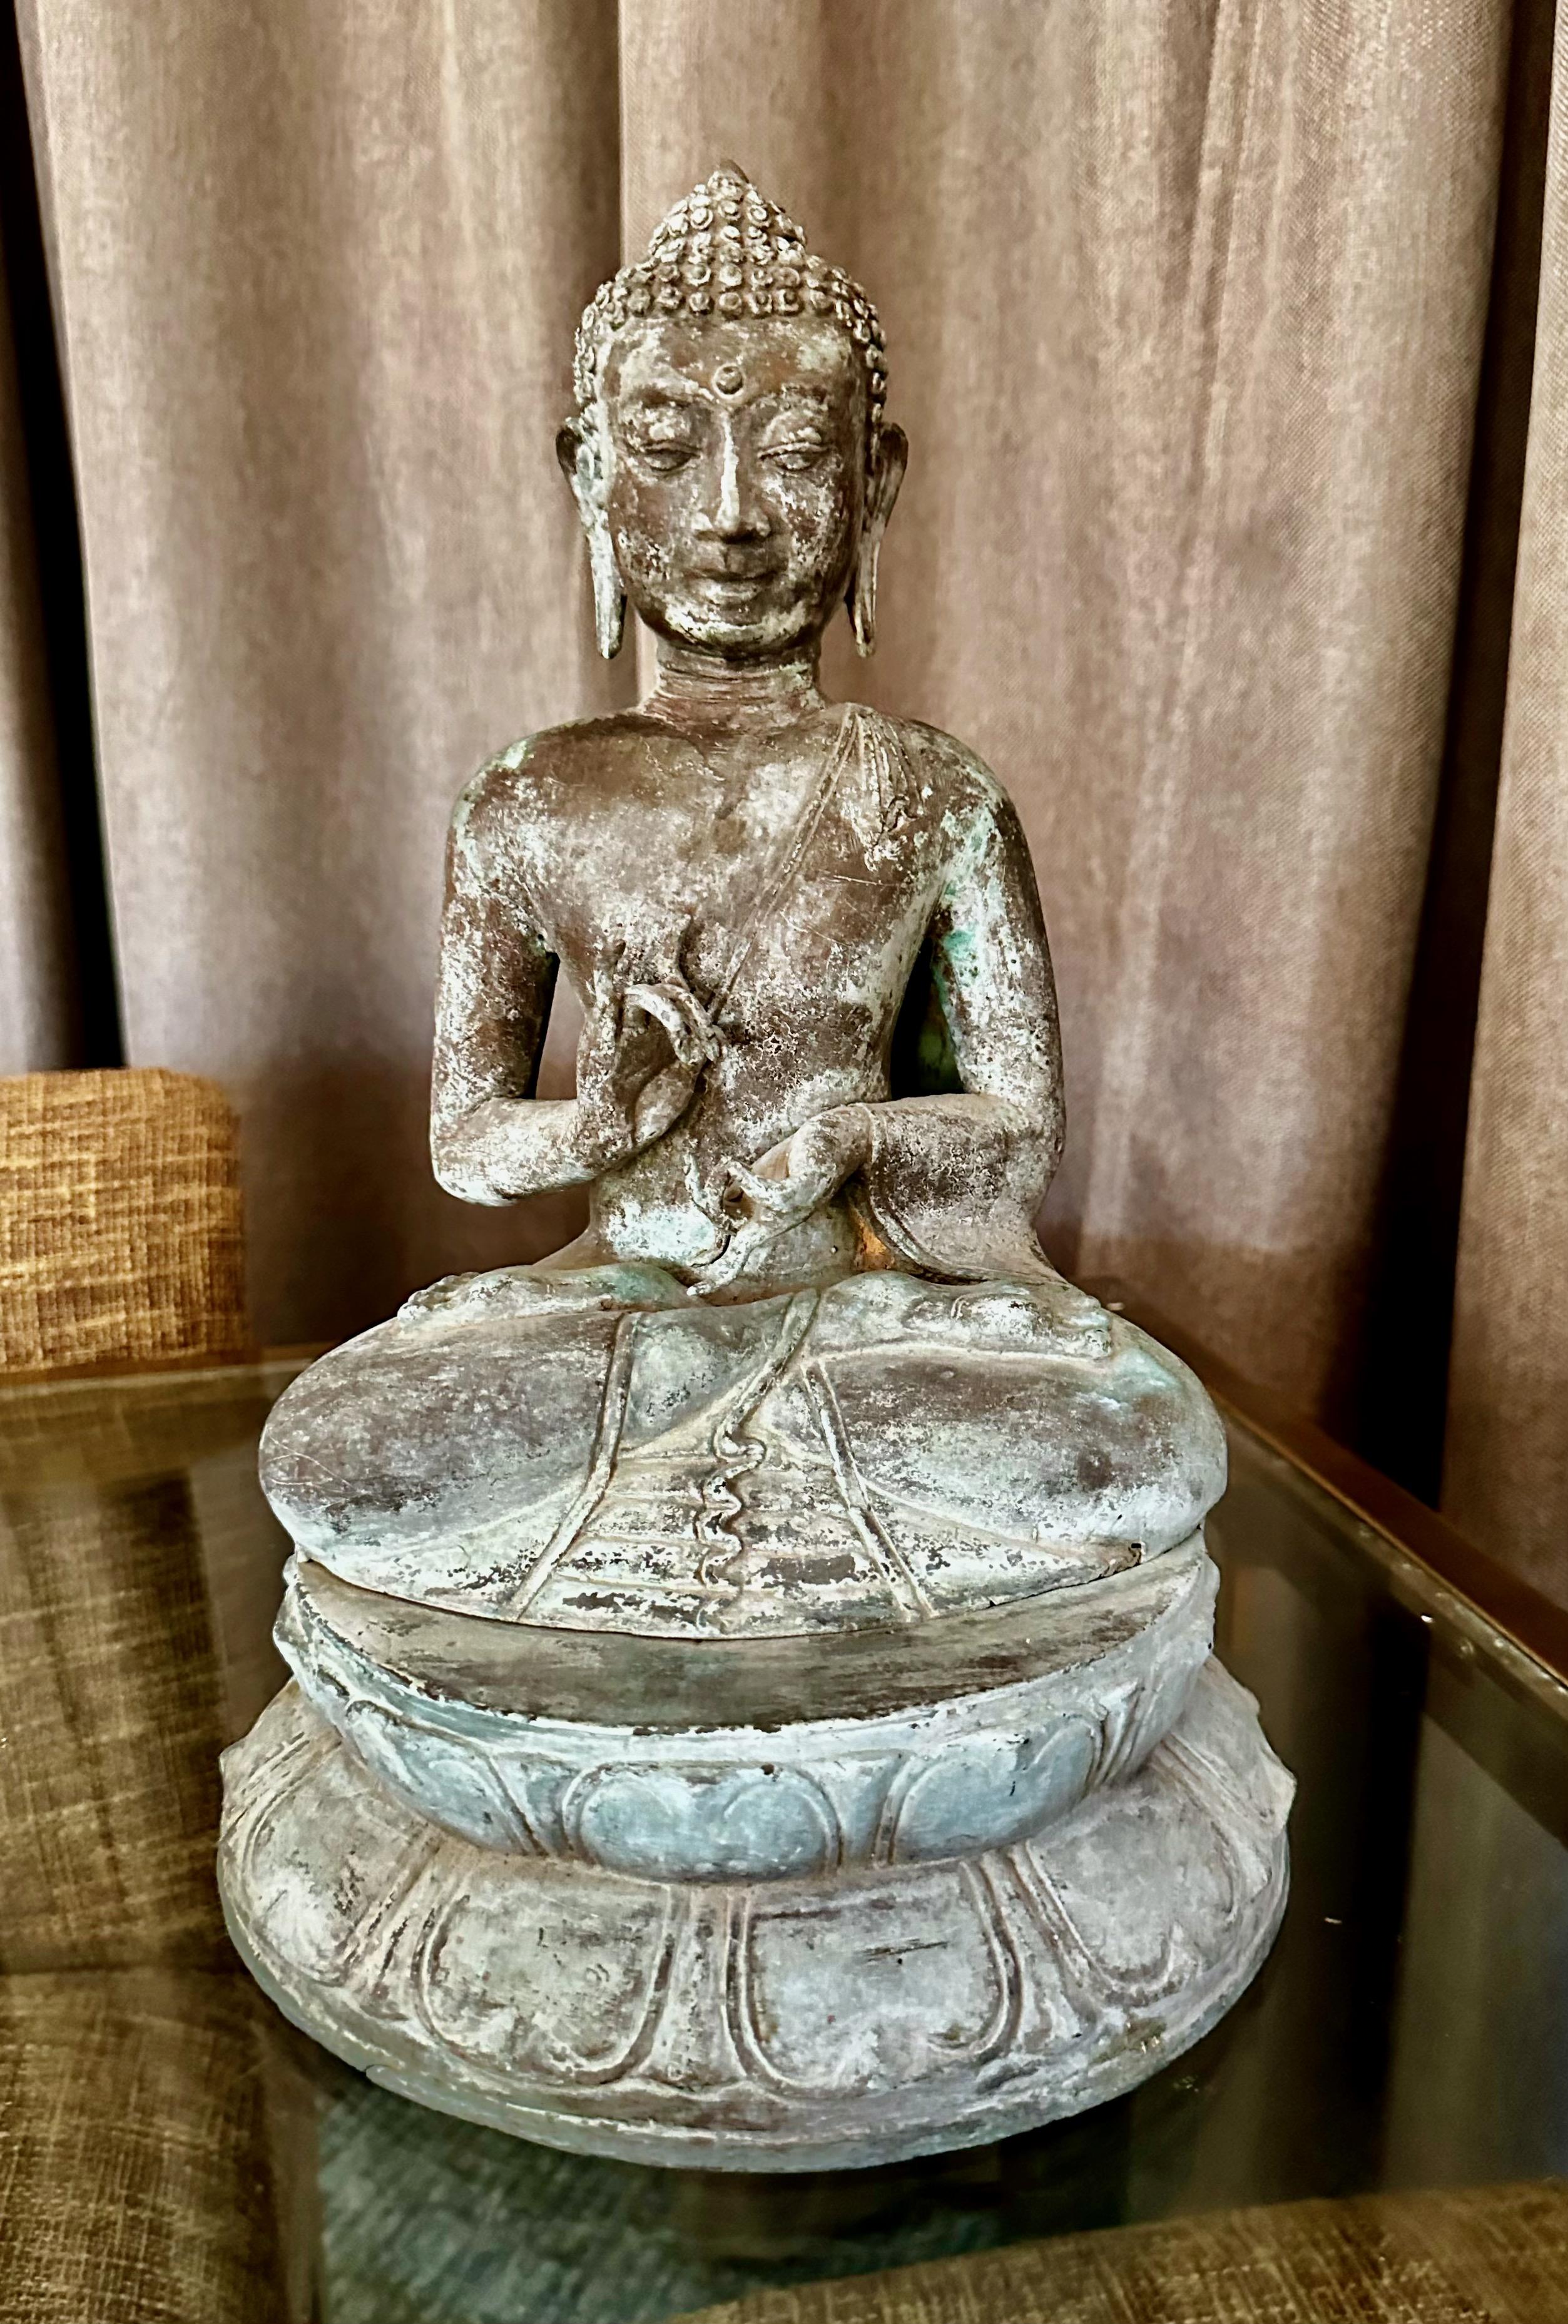 Asian patinated brass or bronze seated Gandhara Style Buddha with both hands raised in the vitarka mudra or teaching hand position.